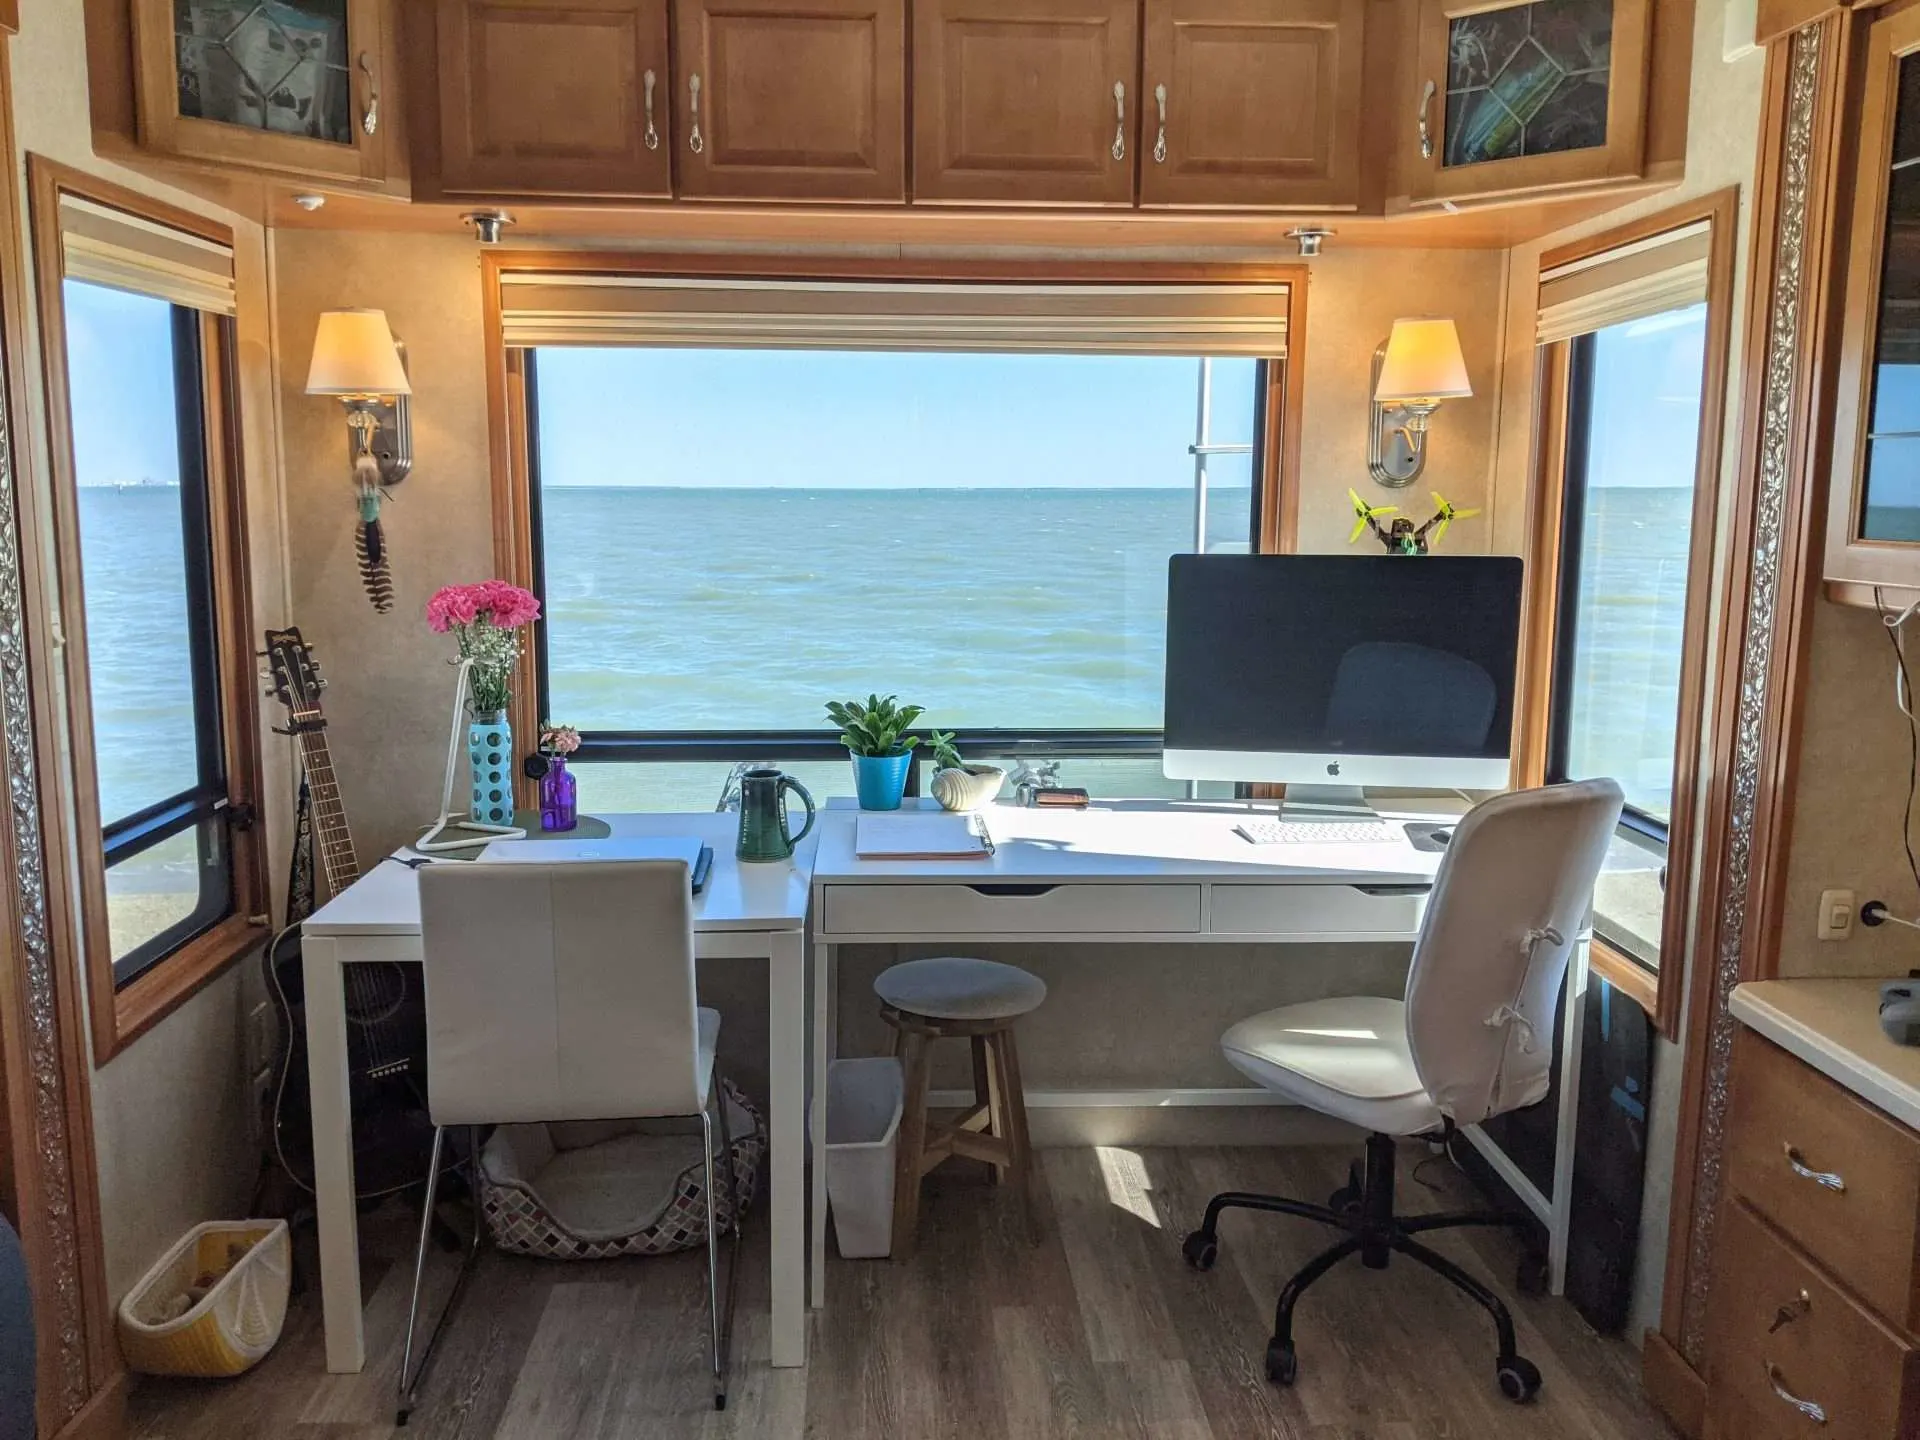 RV desk and computer looking out window to the ocean